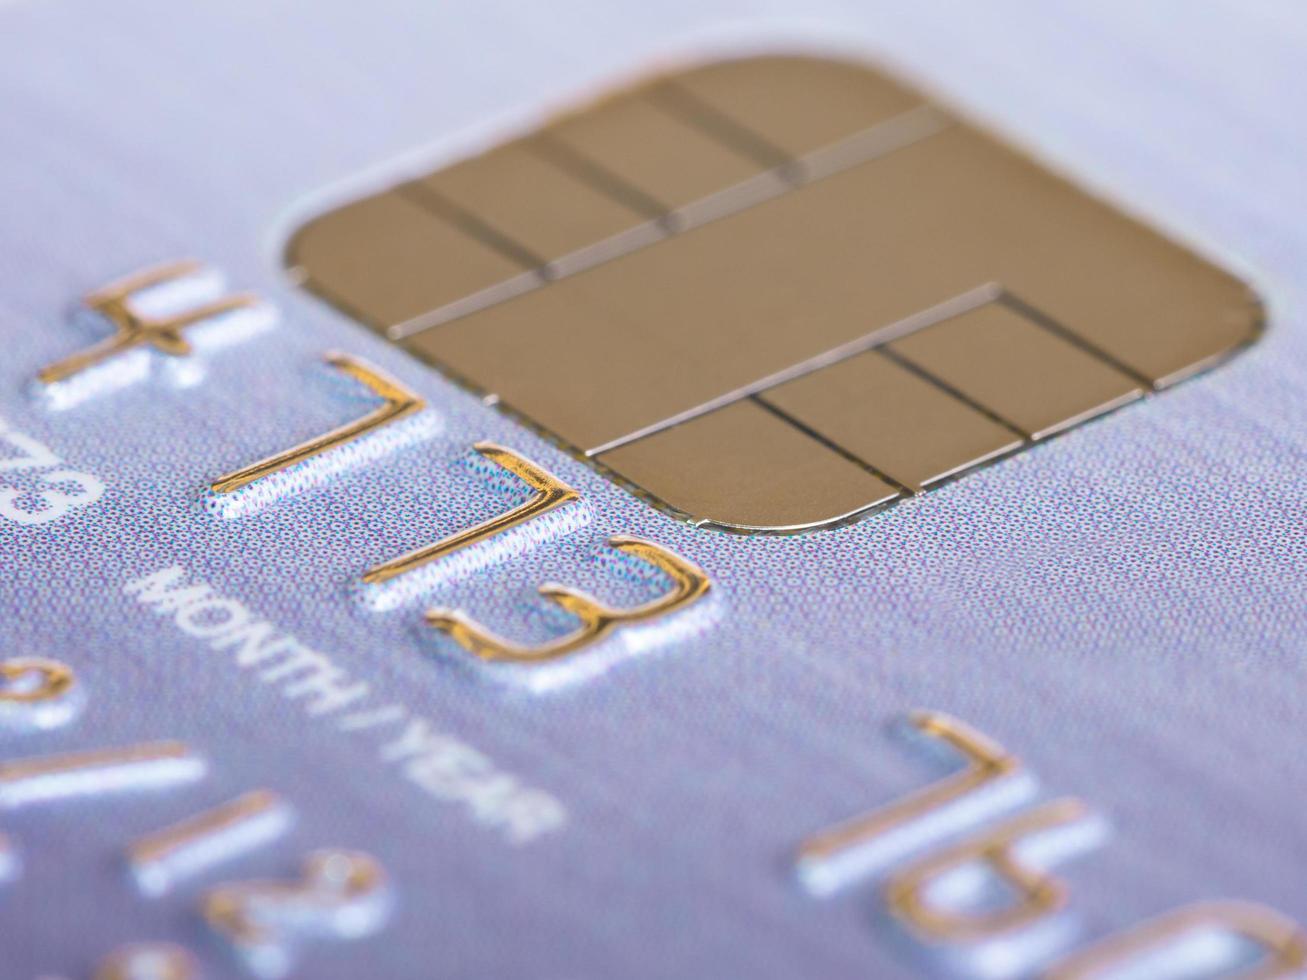 Platinum credit card with micro chip selective focus photo